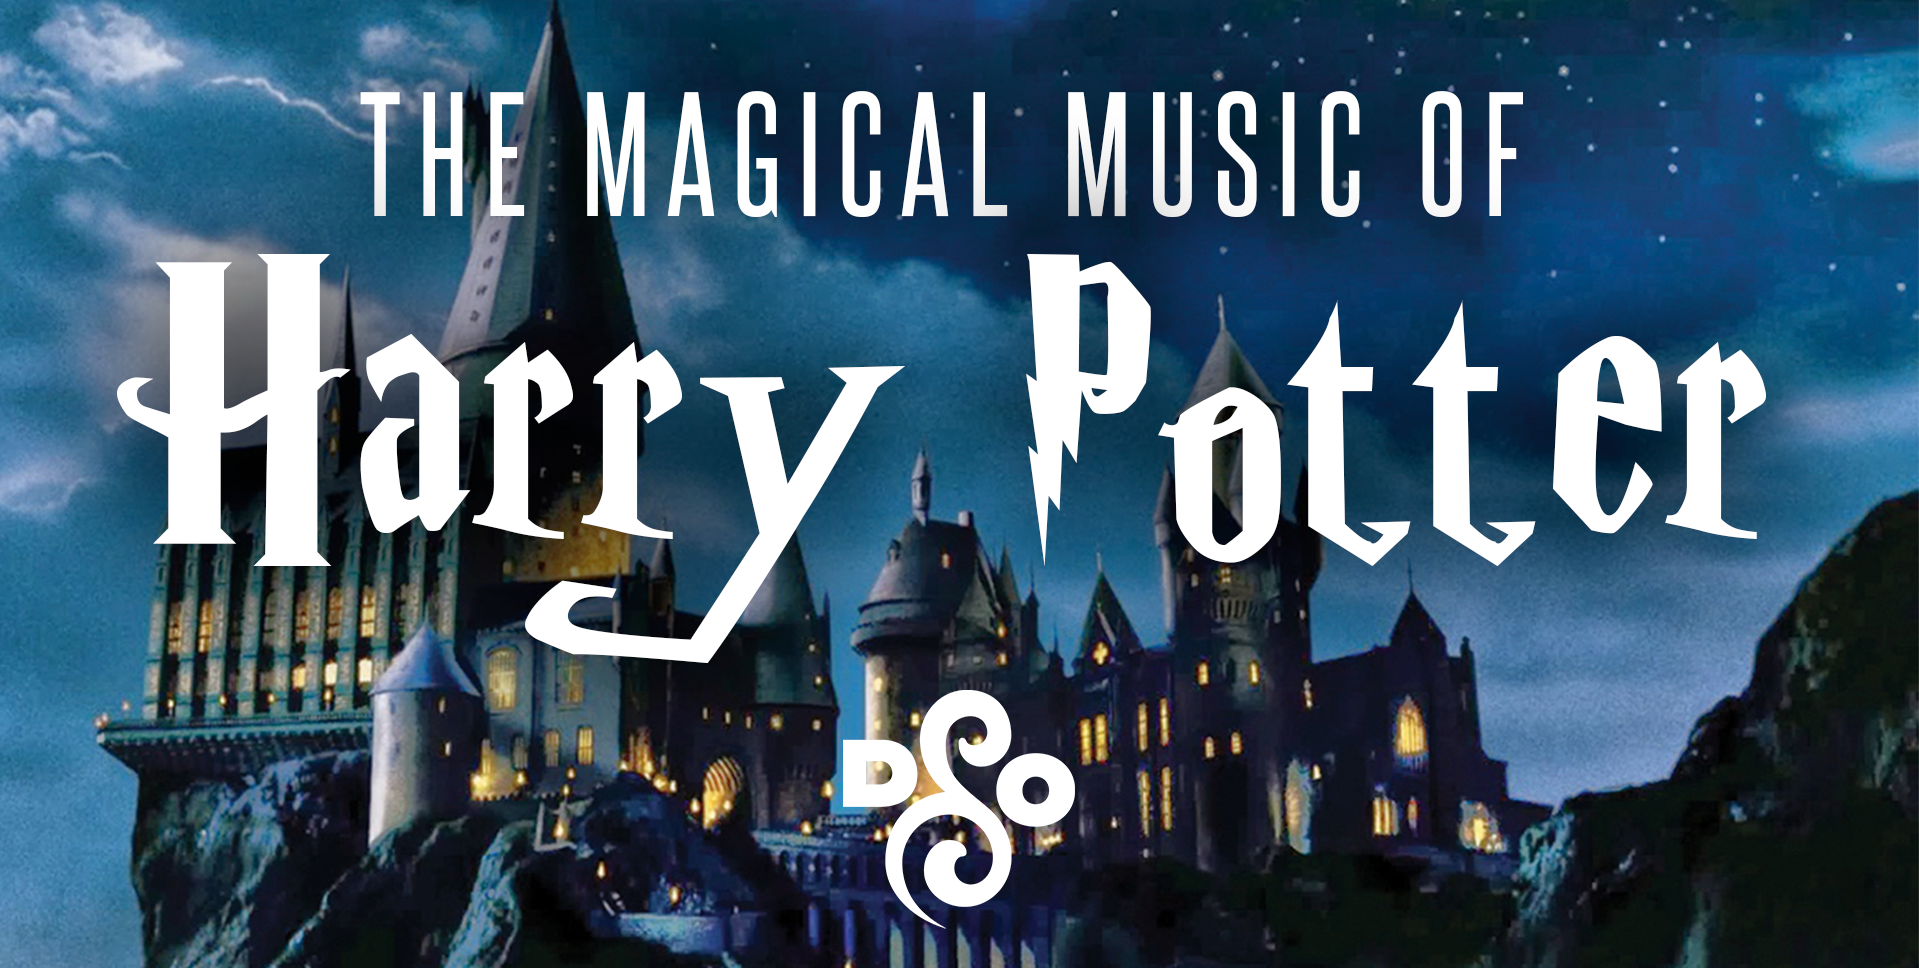 Detroit Symphony Orchestra presents The Magical Music of Harry Potter